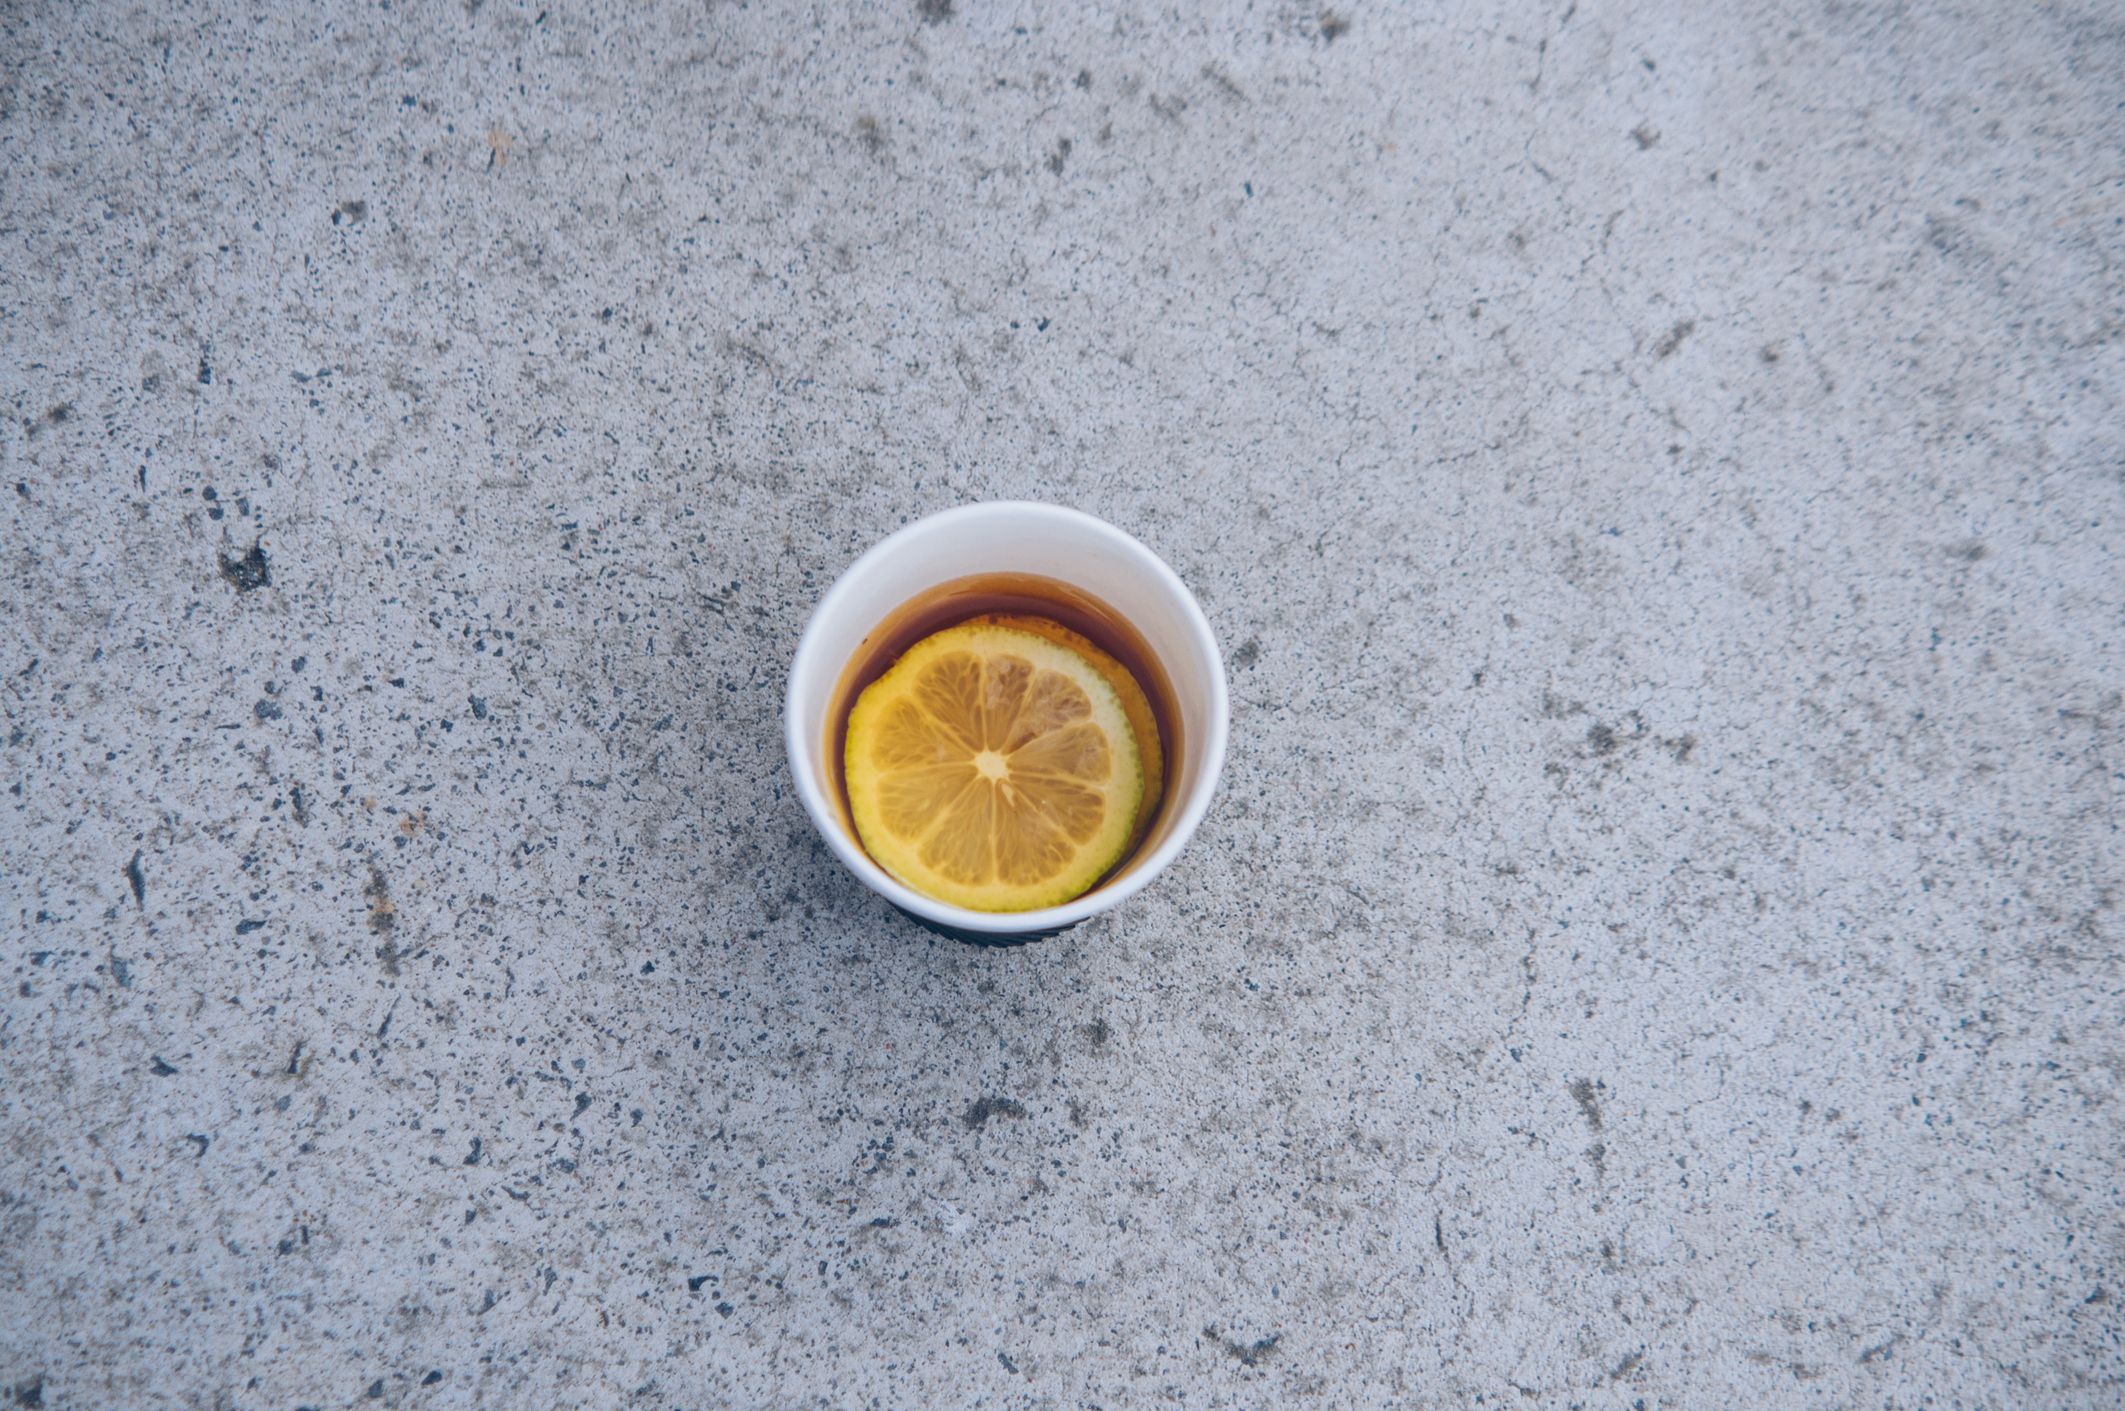 We tried the coffee with lemon trend, and heres what happened pic